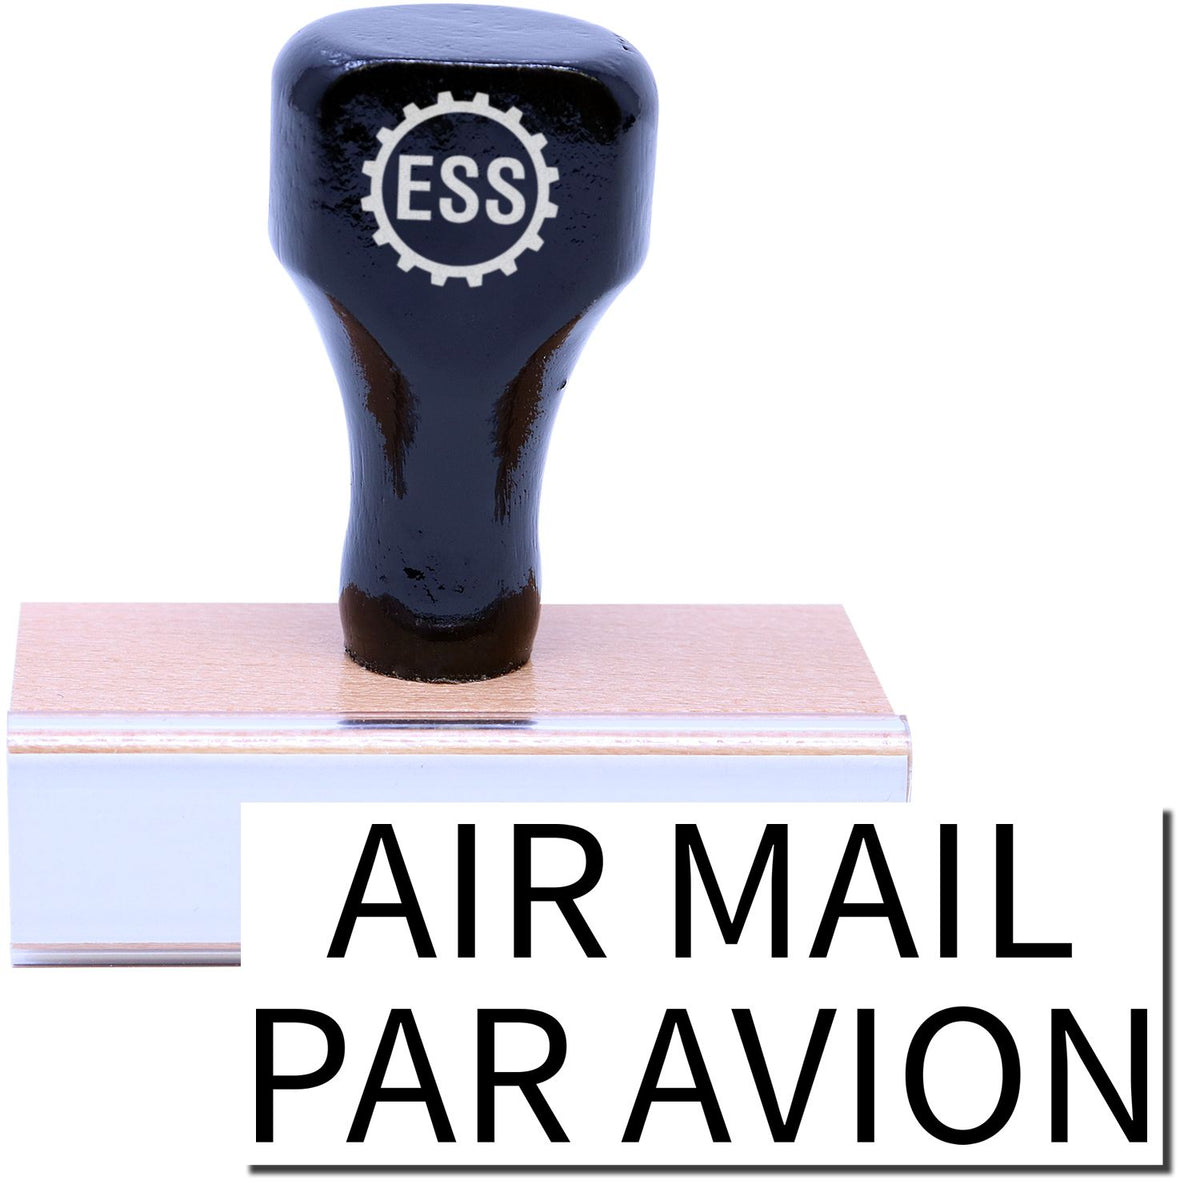 A stock office rubber stamp with a stamped image showing how the text &quot;AIR MAIL PAR AVION&quot; is displayed after stamping.